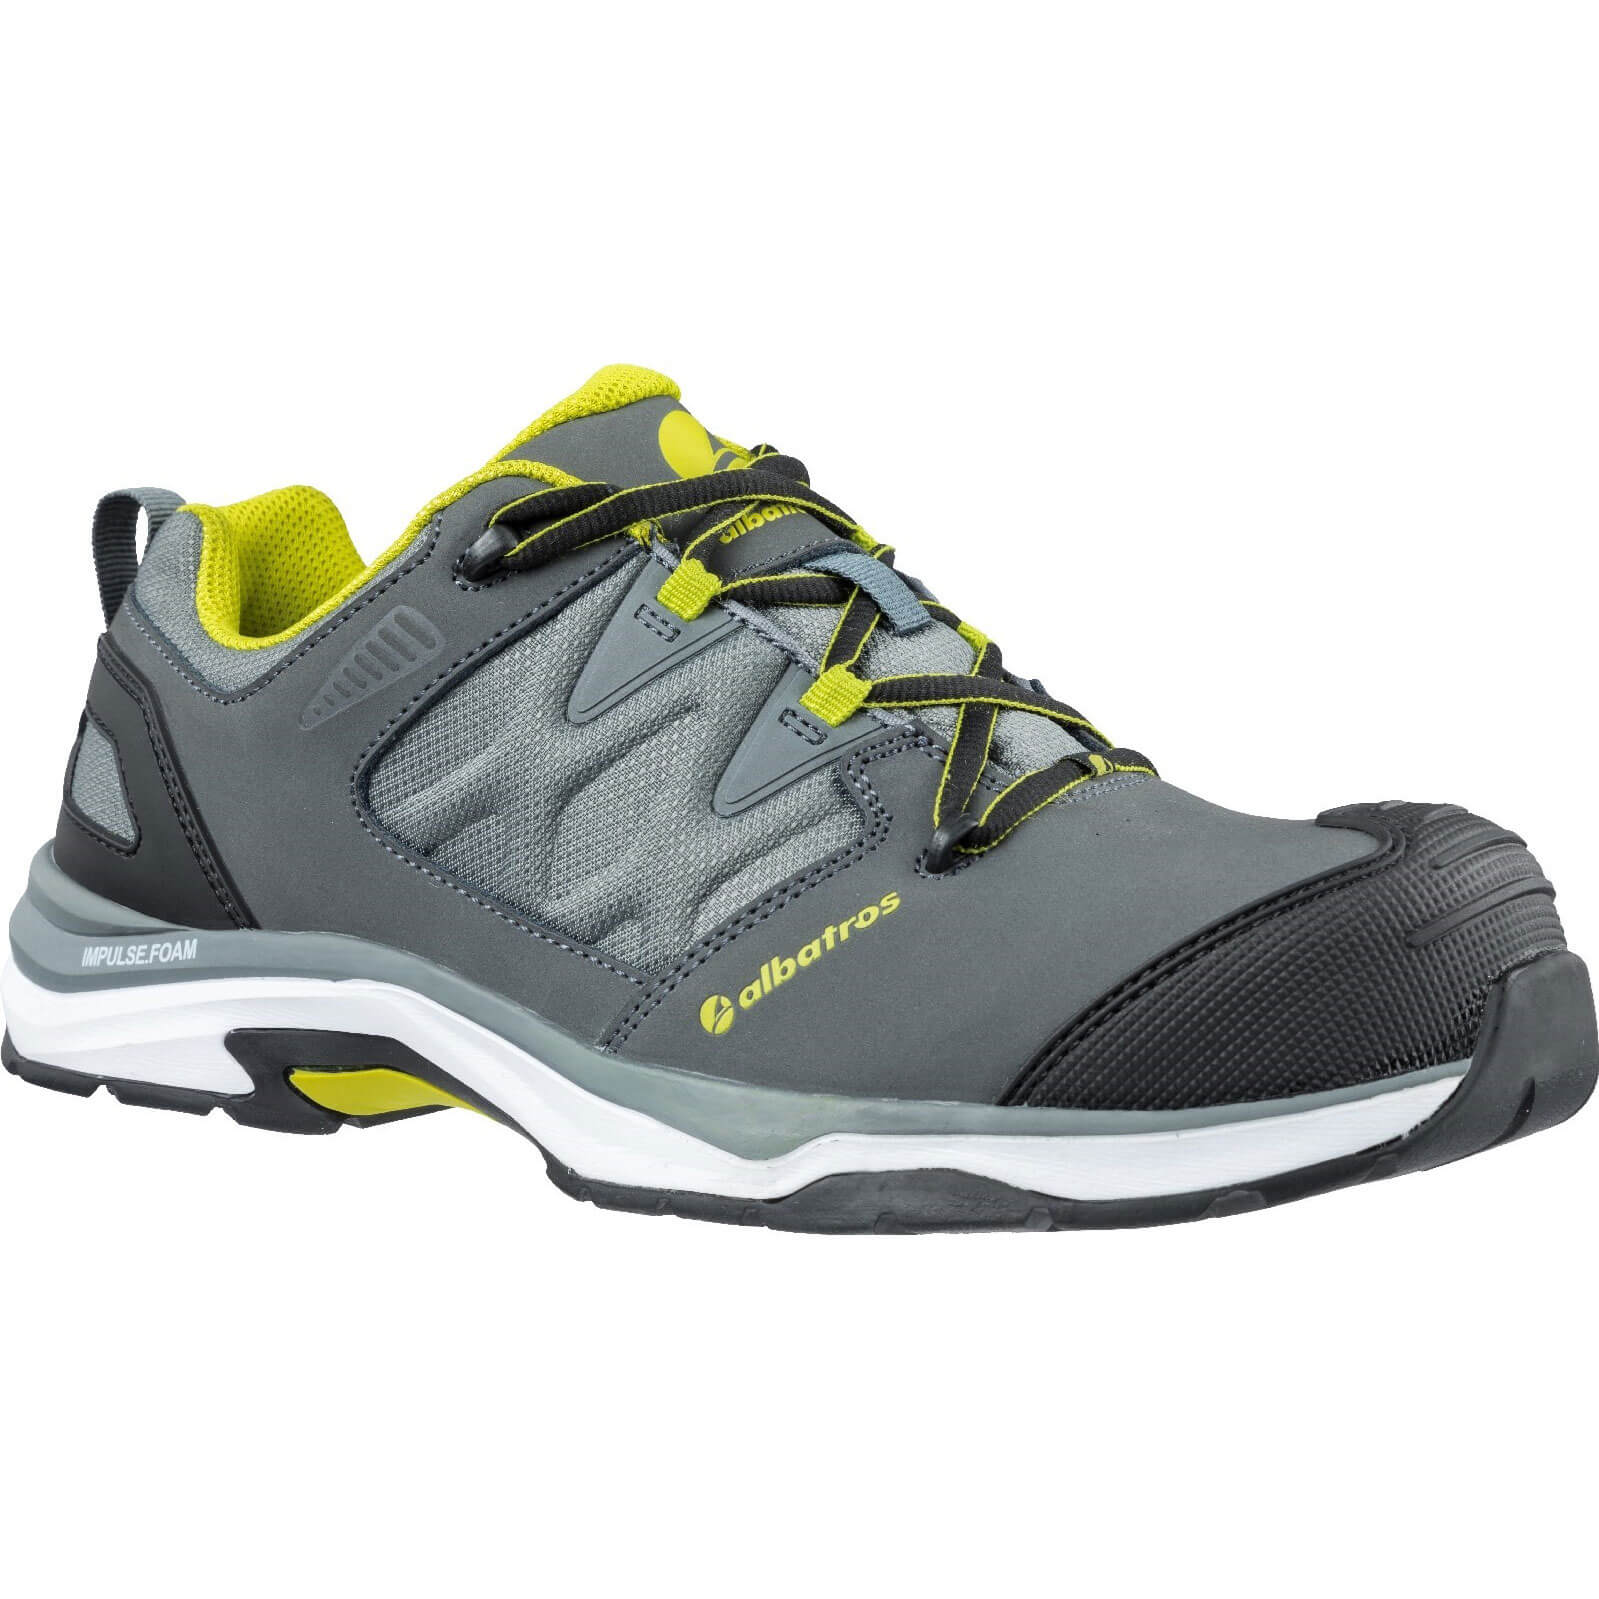 Image of Albatros Ultratrail Low Lace Up Safety Shoe Grey Size 6.5